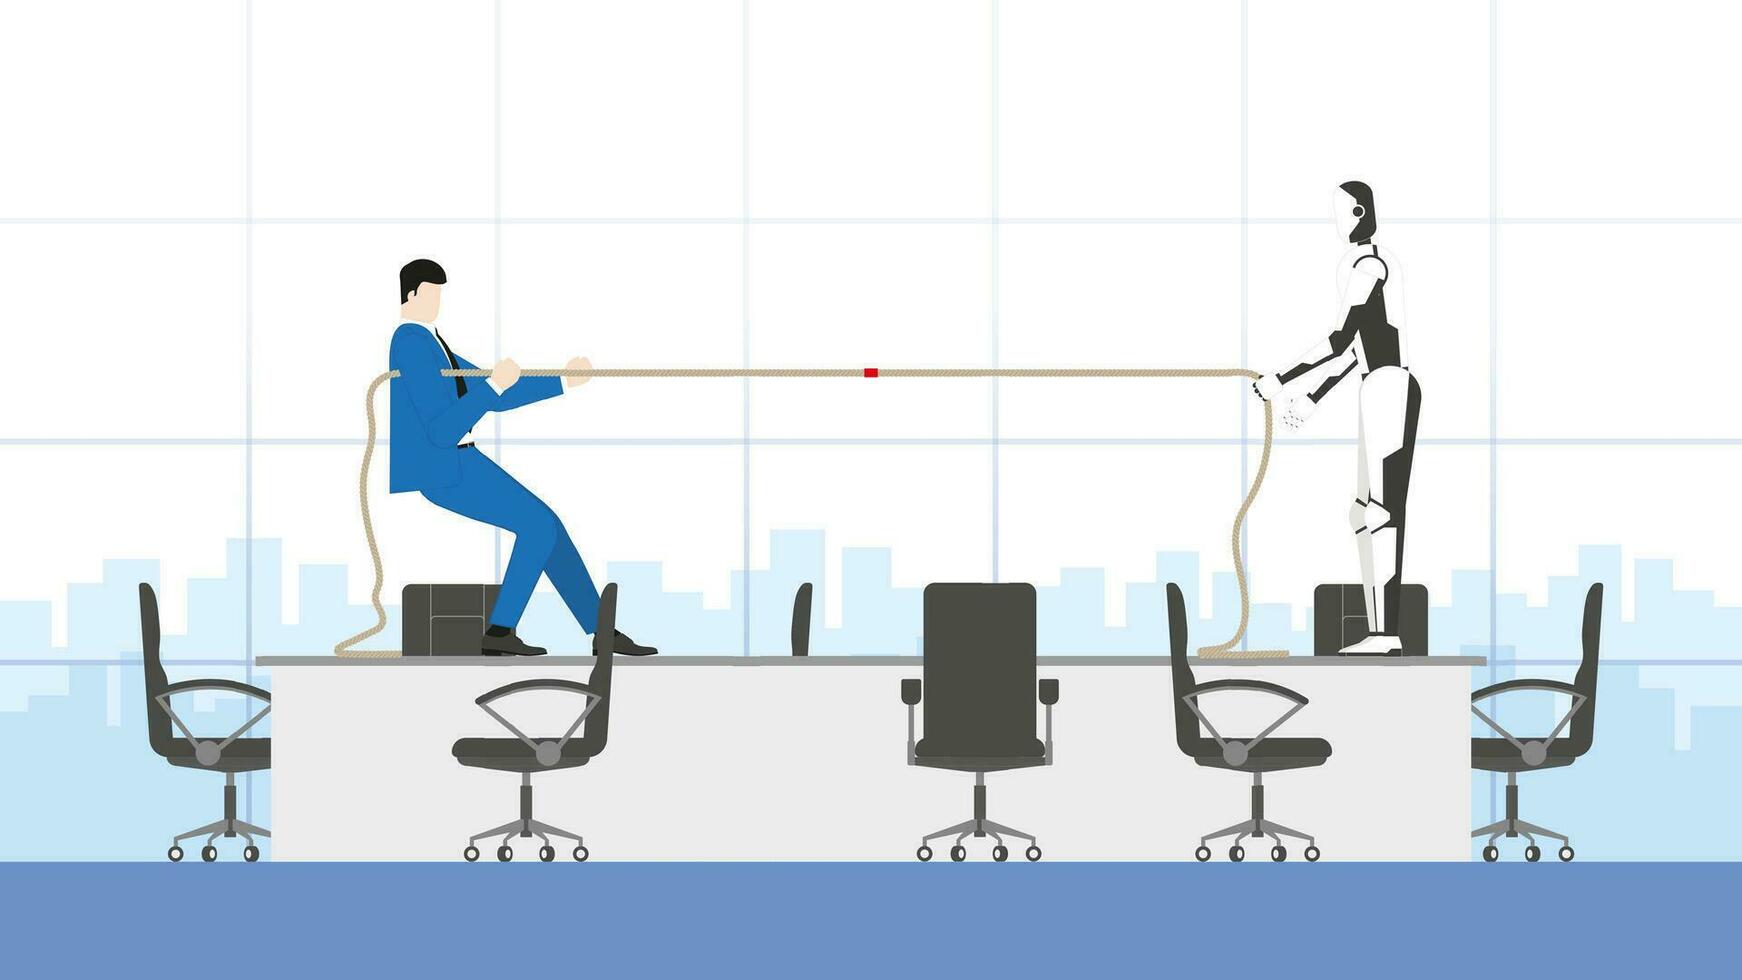 Business competition and cyber technology confrontation concept. A businessman and a robot fight tug of war rope in an office workplace vector